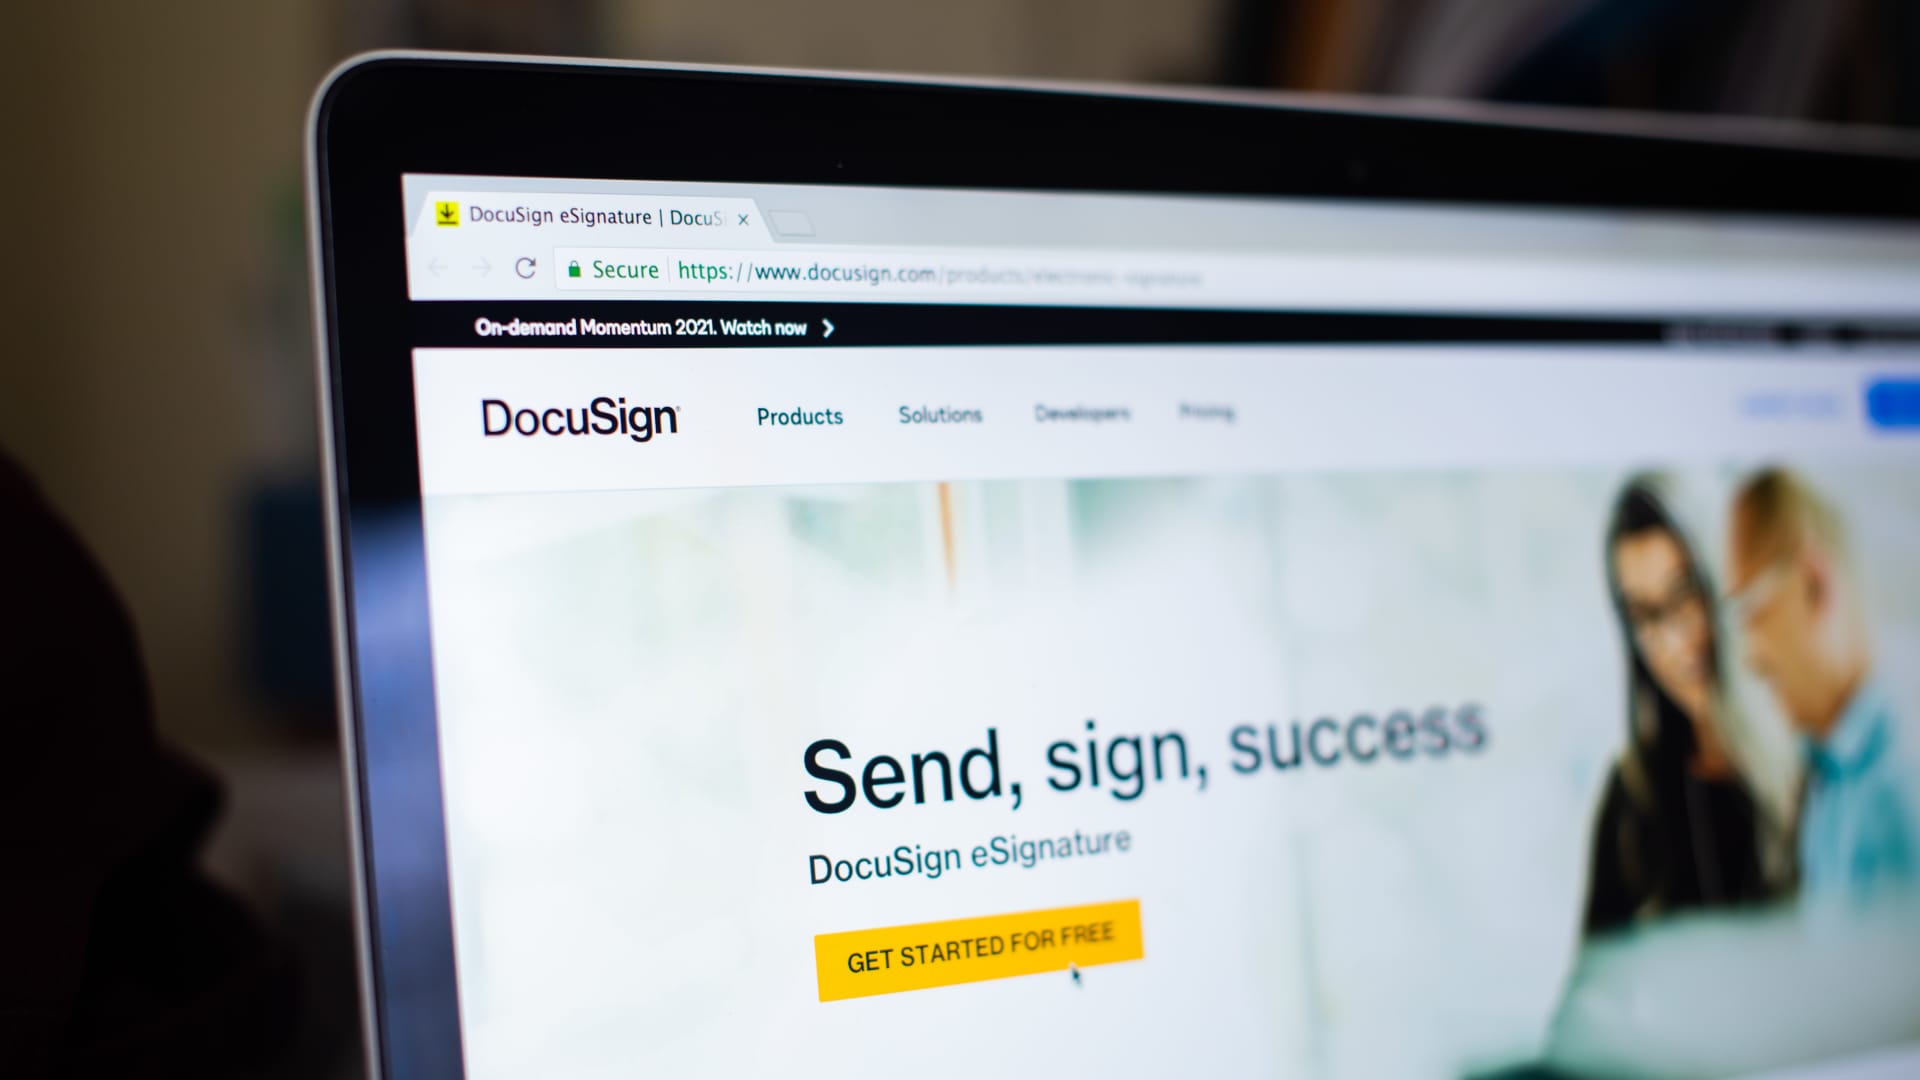 DocuSign to cut workforce by 9% as part of restructuring plan